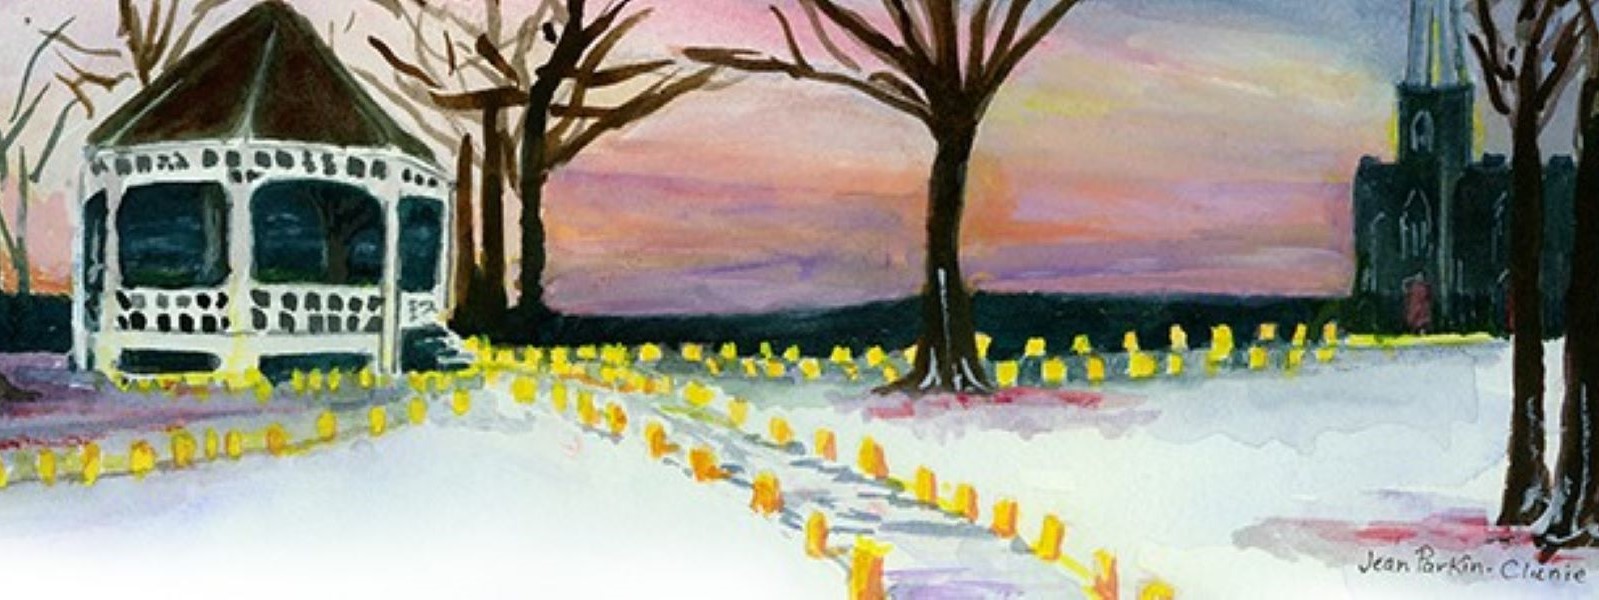 MaineGeneral Hospice Celebration of Lights: watercolor painting of the Gardiner Commons gazebo at sunset, surrounded by walkways lit with glowing luminaria